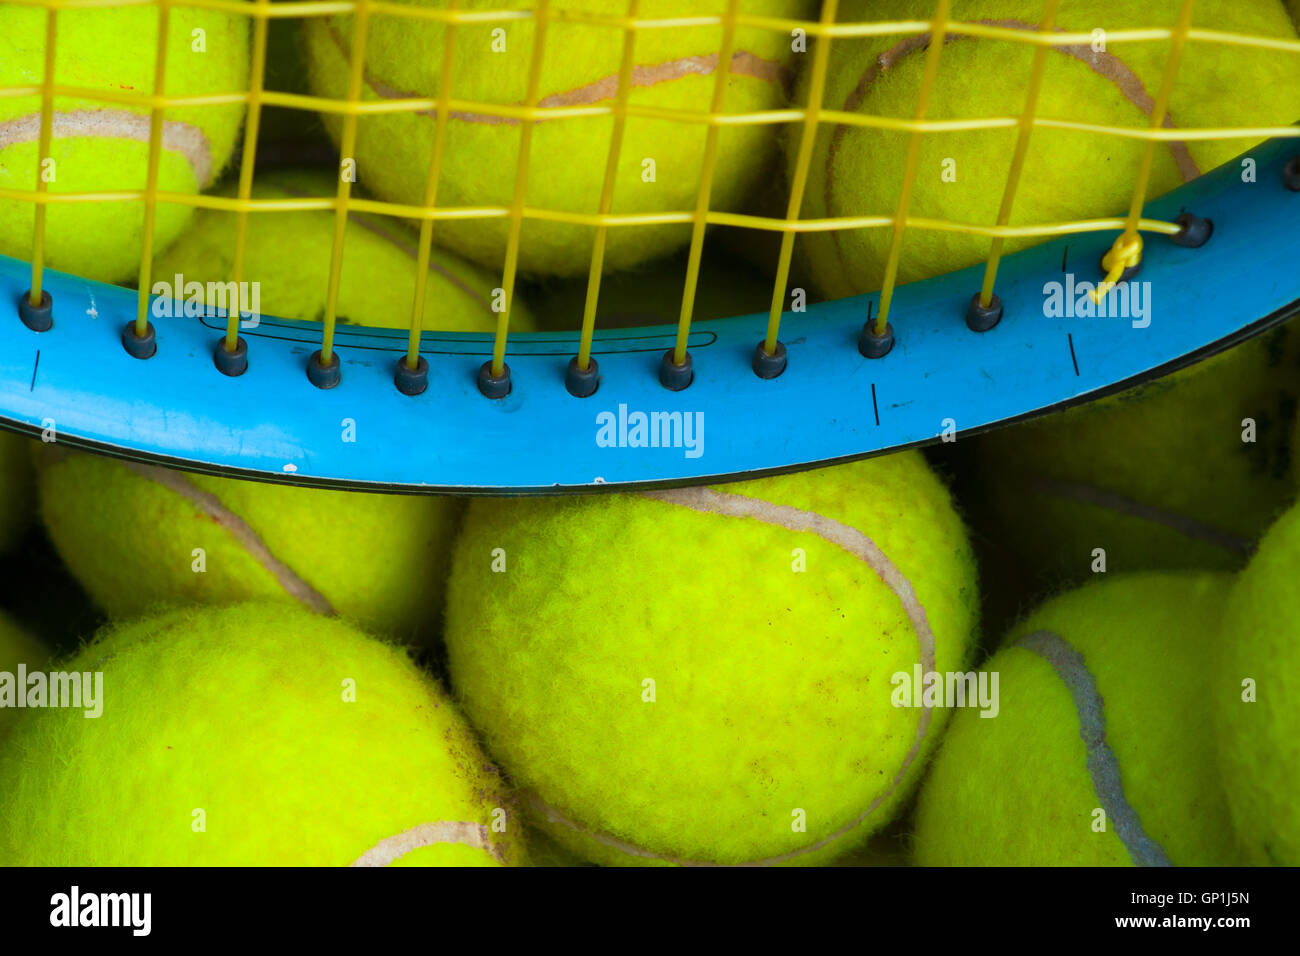 A pile of light-green tennis balls and a tennis-racket in a box. Partial view of the racket. Court tennis theme. Stock Photo